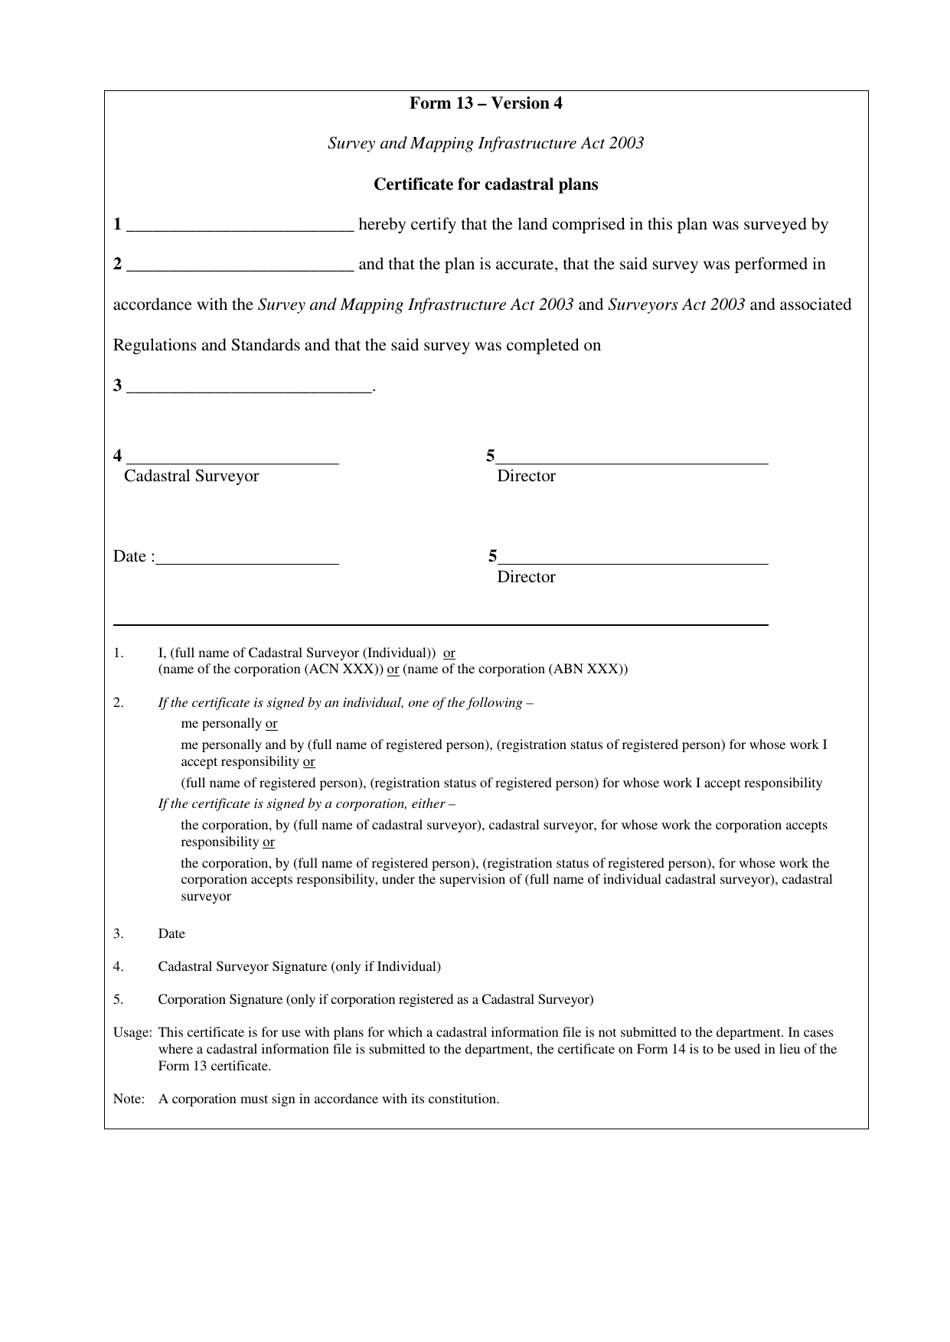 Form 13 Certificate for Cadastral Plans - Queensland, Australia, Page 1